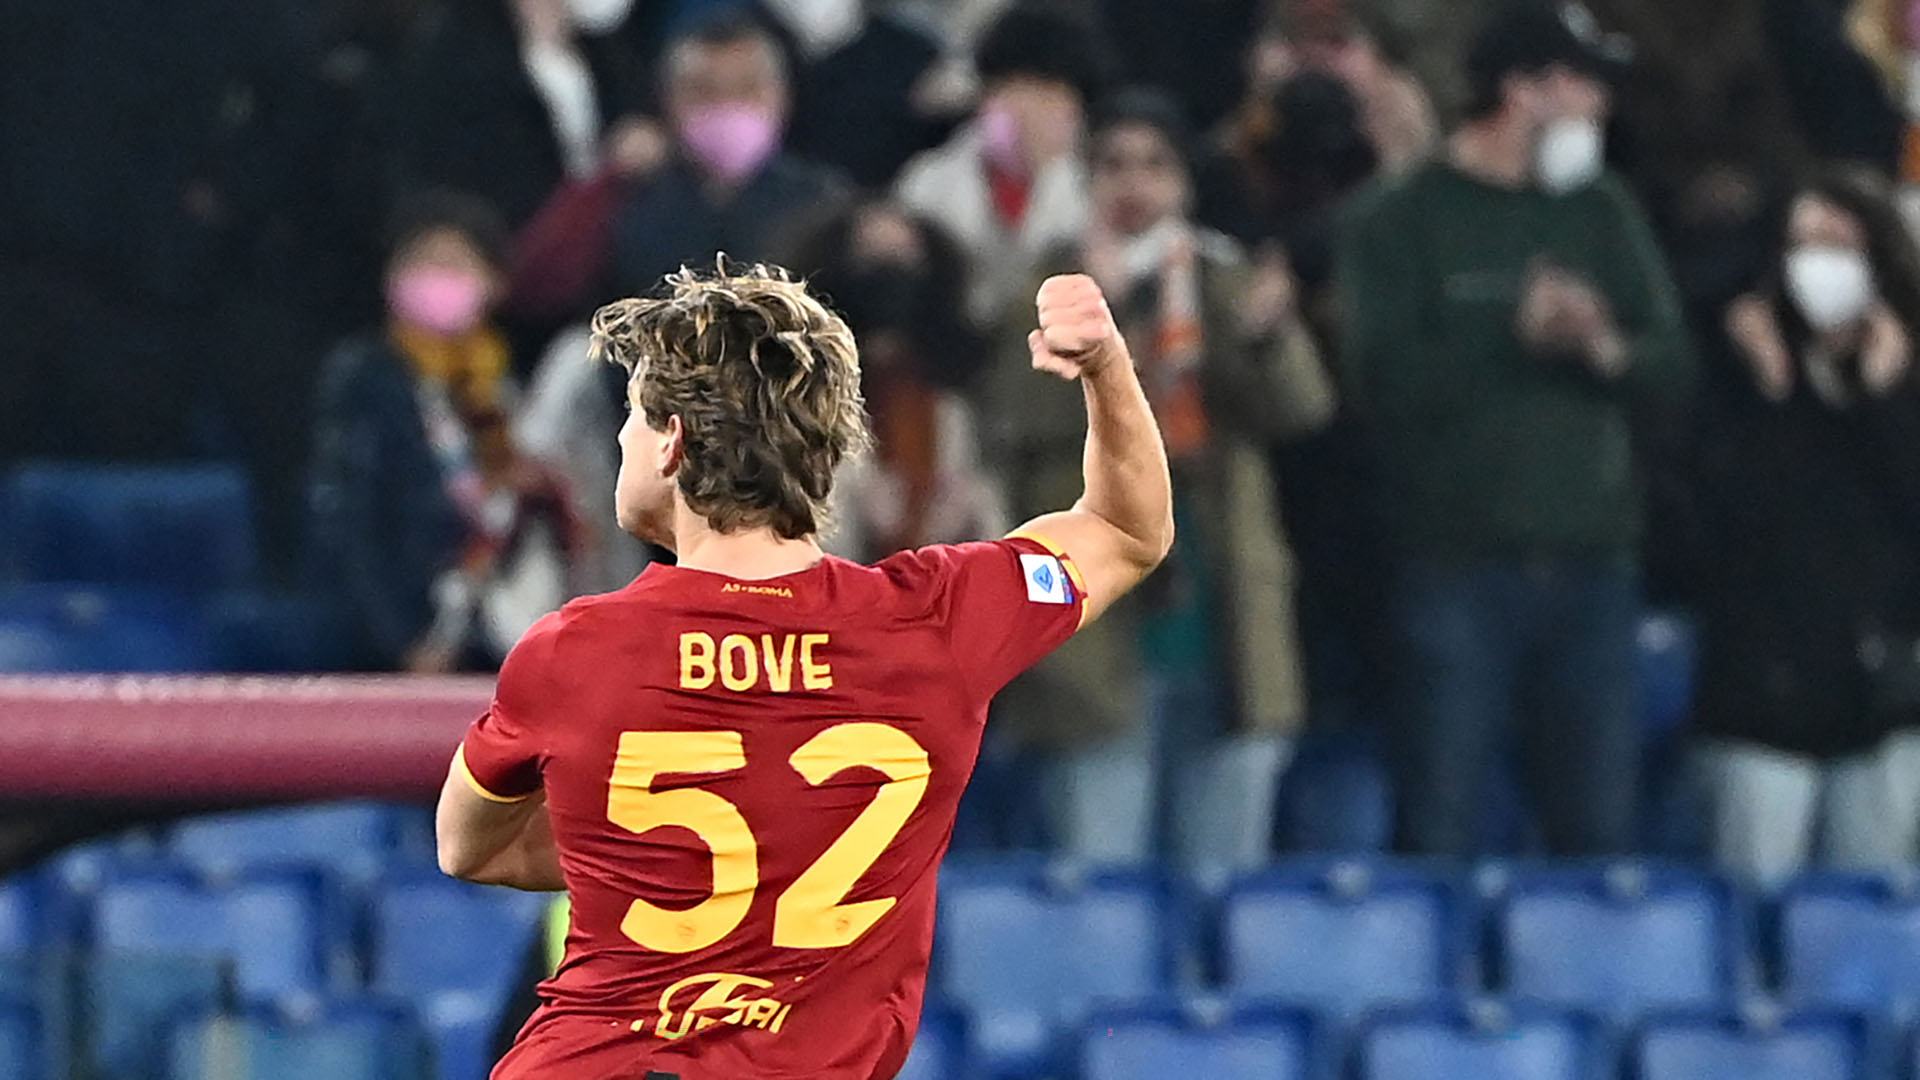 Edoardo Bove has been a regular since José Mourinho started guiding Roma. He's one of the least player player in the squad.